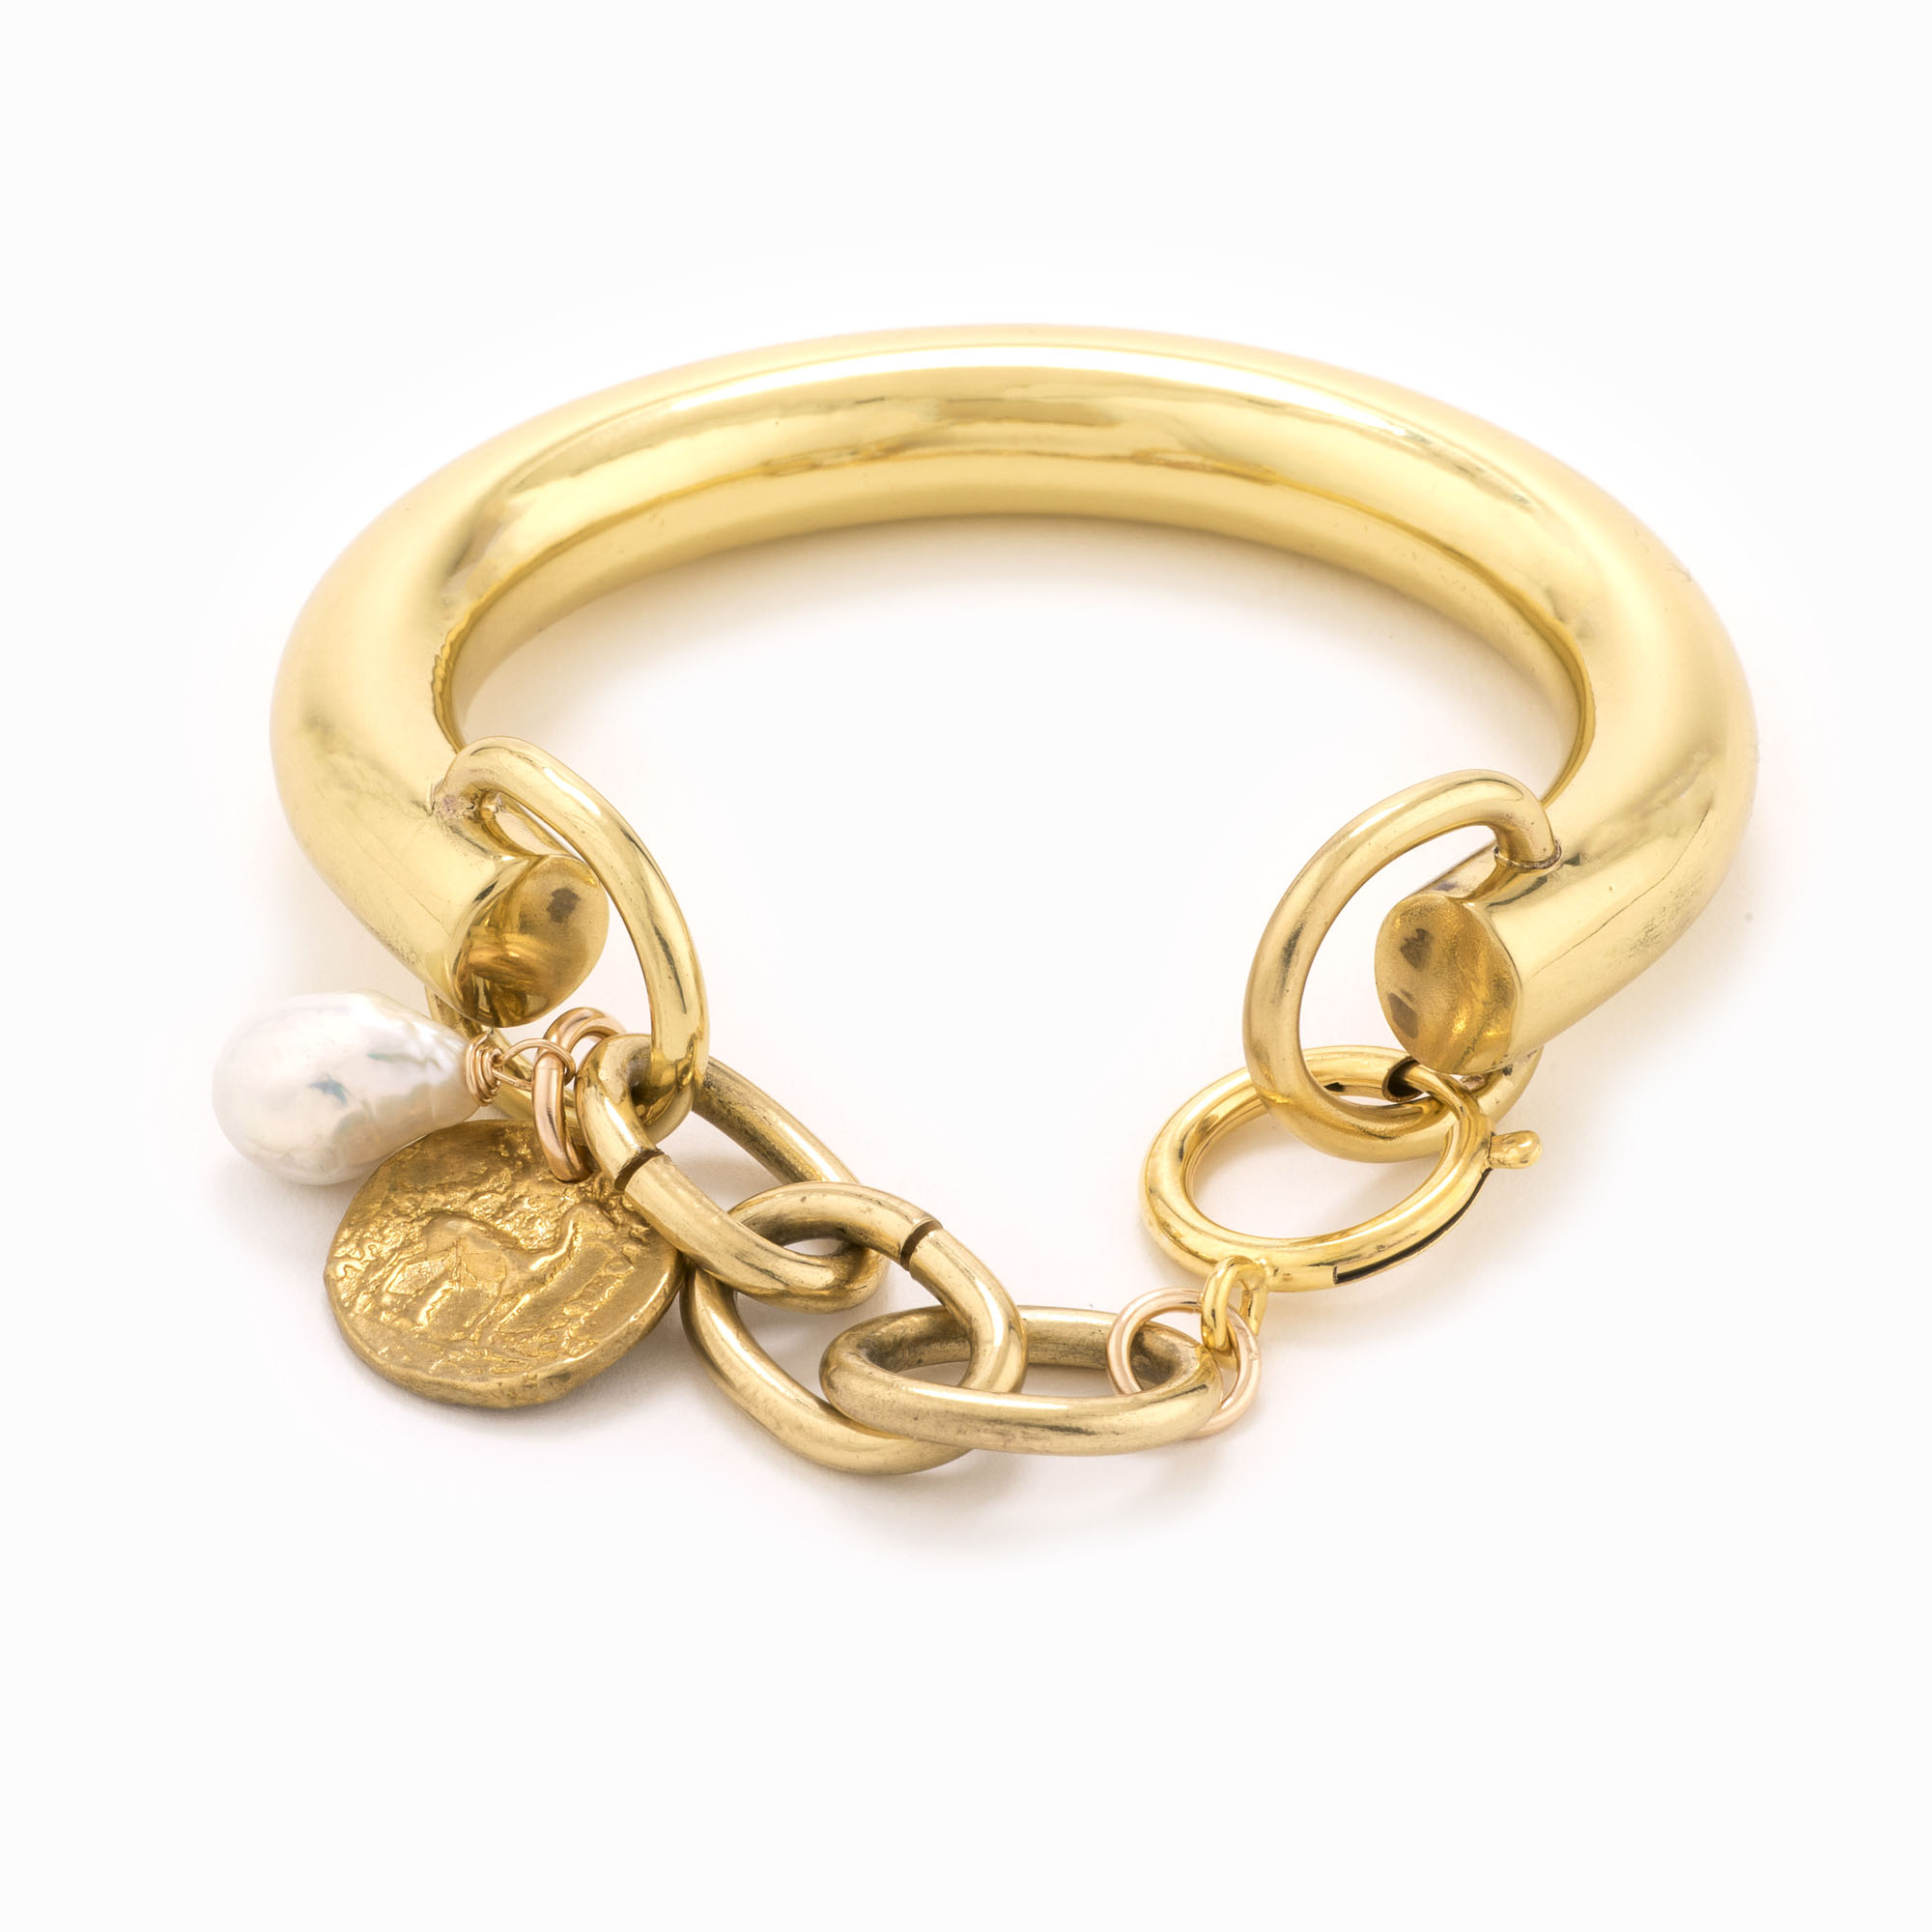 Featured image for “Juno Brass Bracelet”